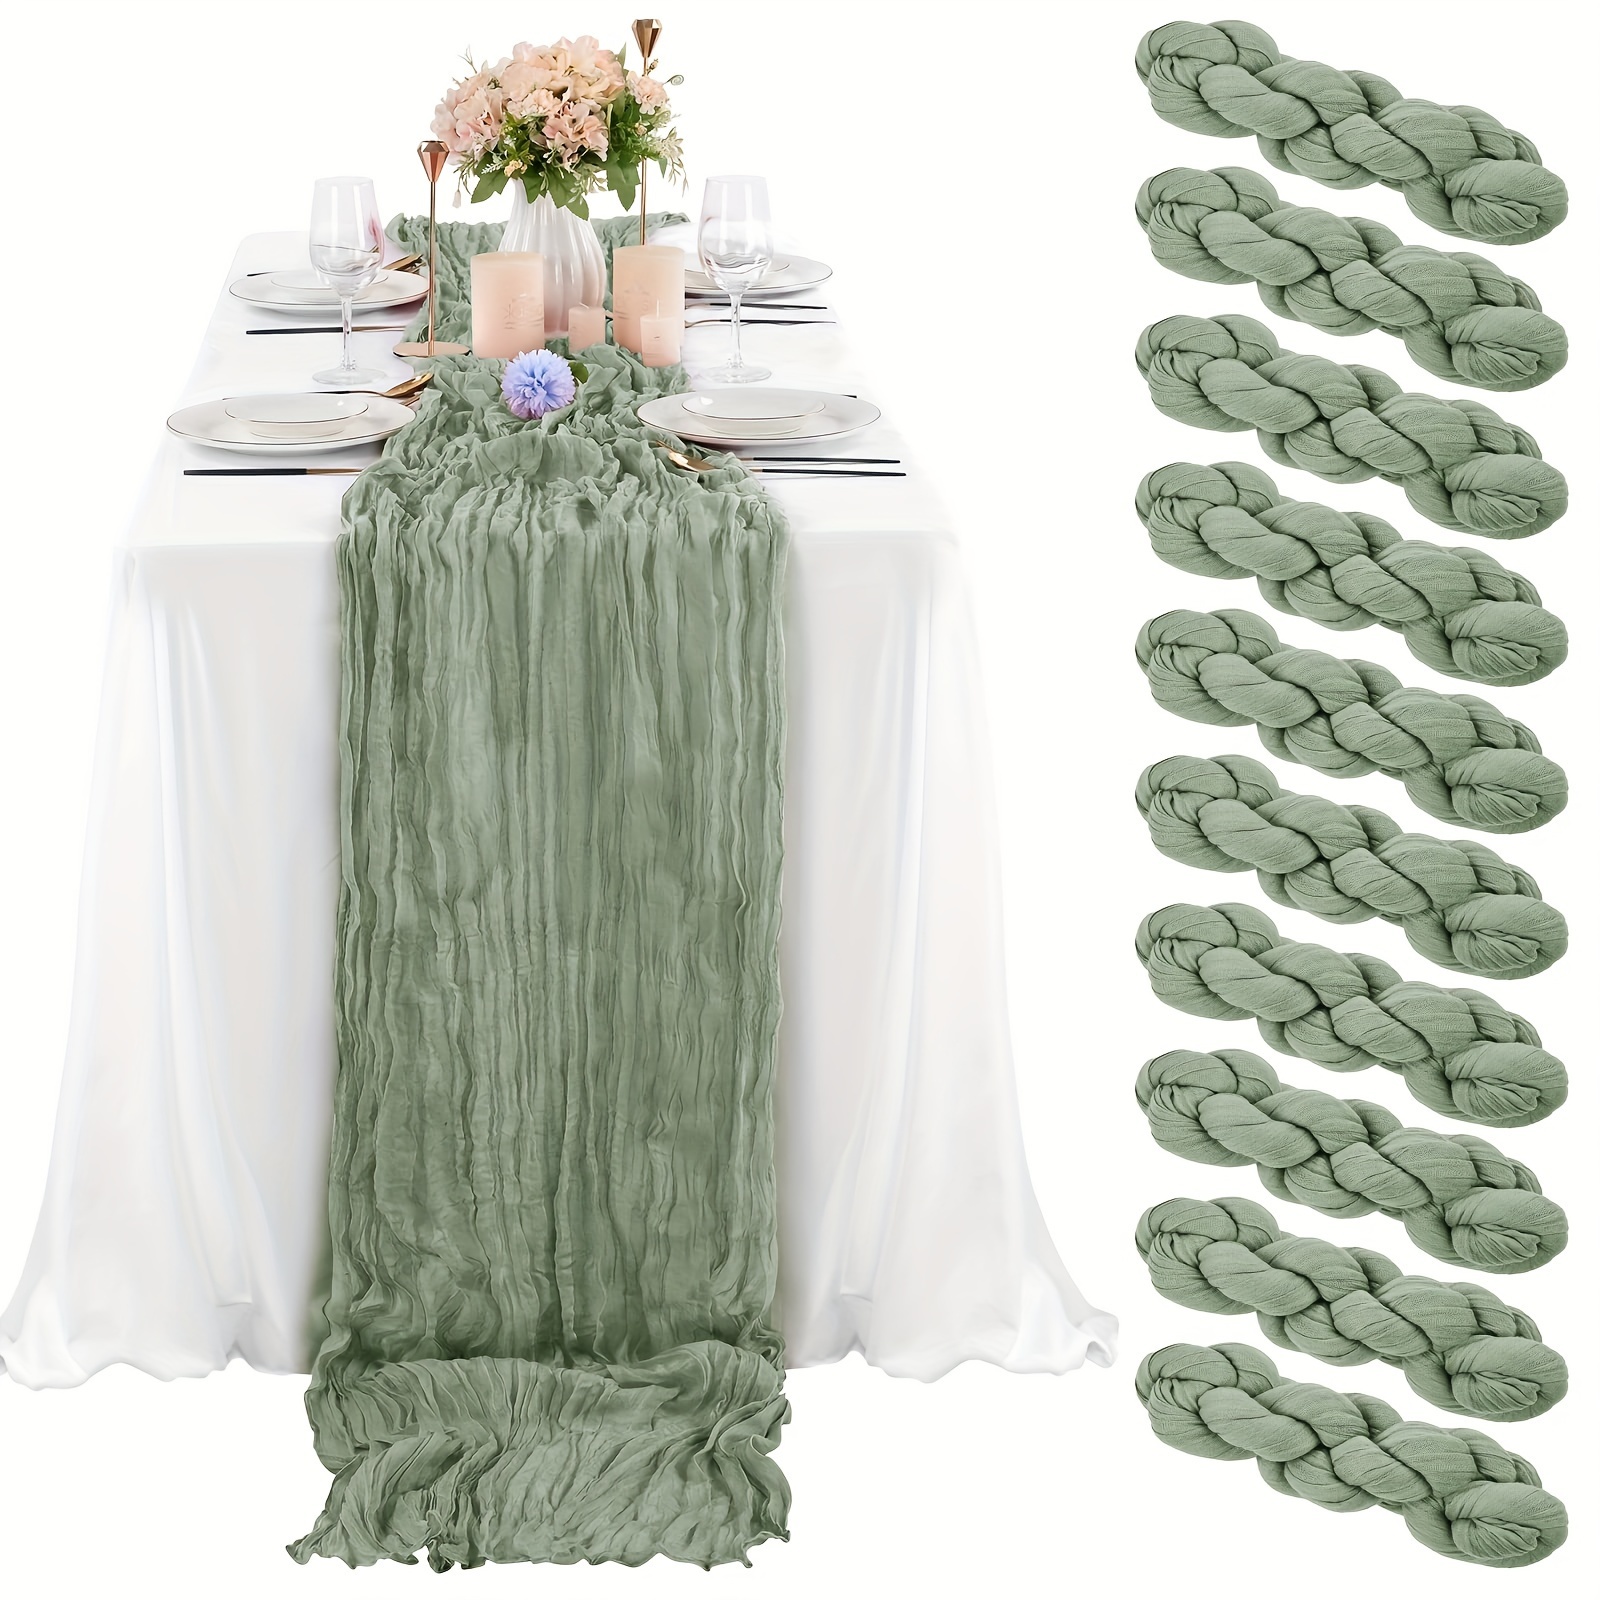 

10-pack Solid Sage Green Polyester Table Runners - Rectangular Cheese Cloth Sheer Gauze Wedding Reception Table Decor - Vintage Styled Wrinkle Transparent Table Overlay For Bridal Decorations